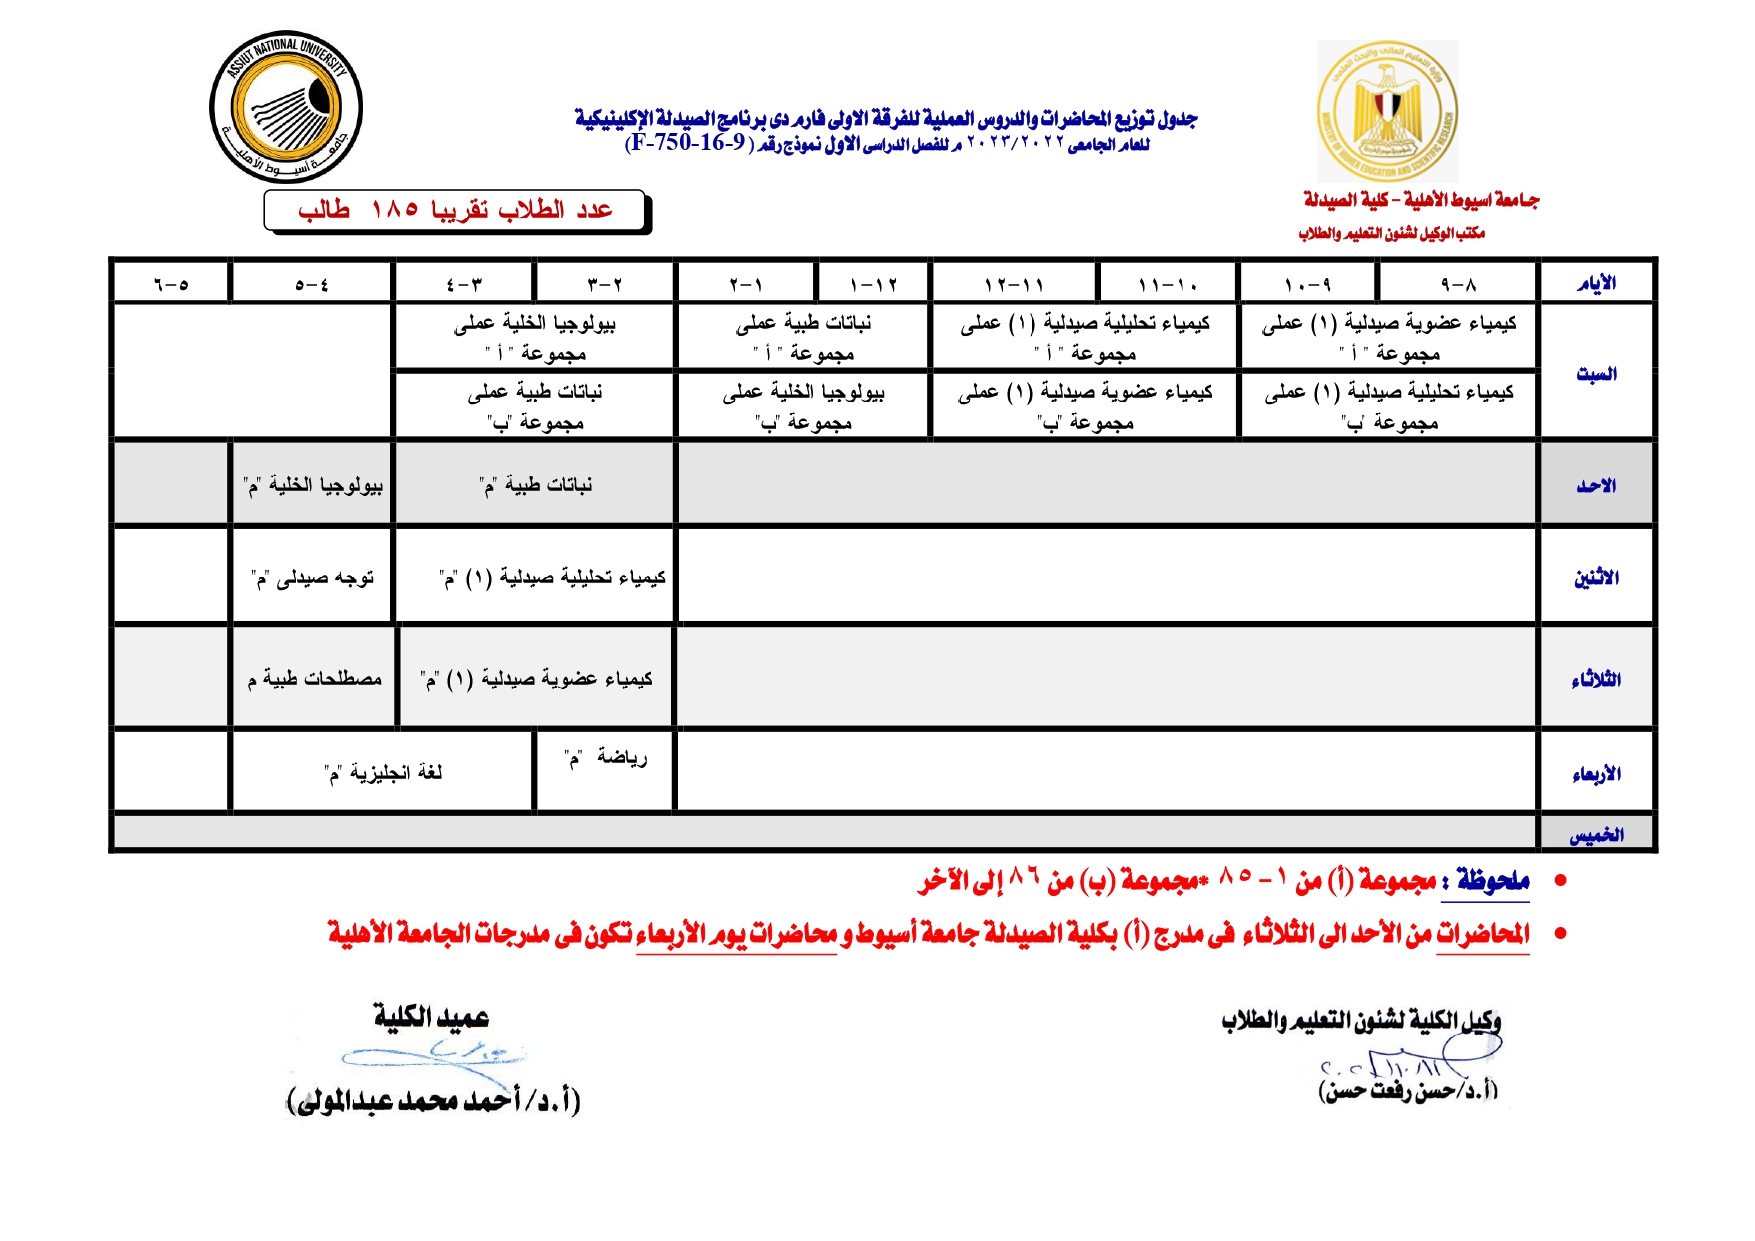 Schedule of lectures and practical lessons for the first year Pharm D Clinical Pharmacy Program at Ahlia University for the academic year 2022/2023